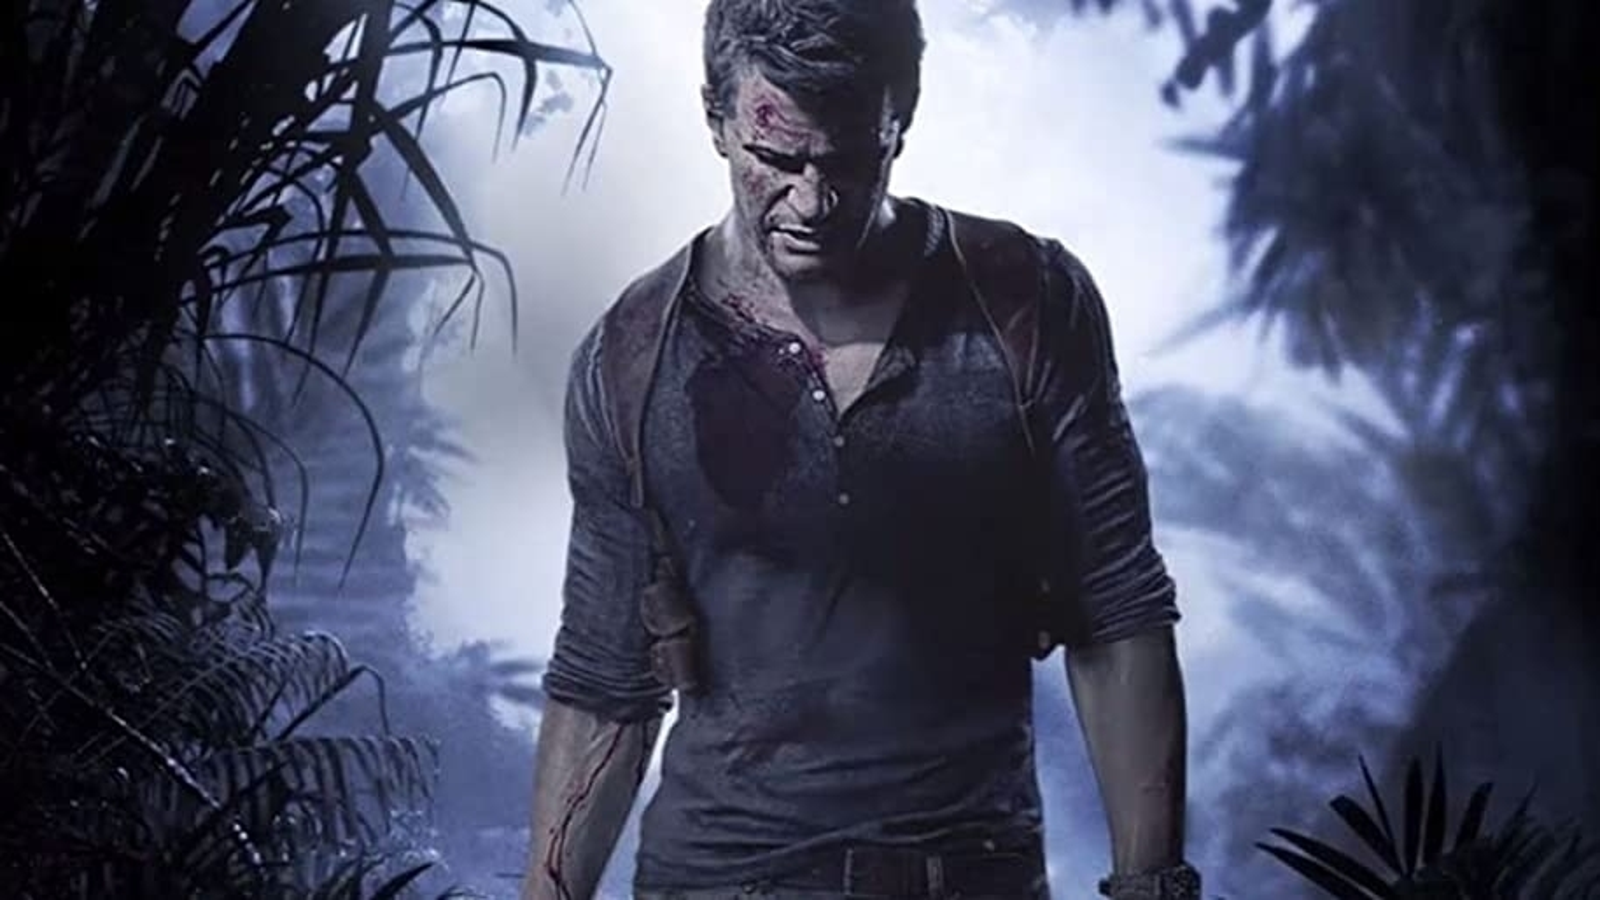 Uncharted 4 for PC and PS5 has been rated, suggesting a release soon